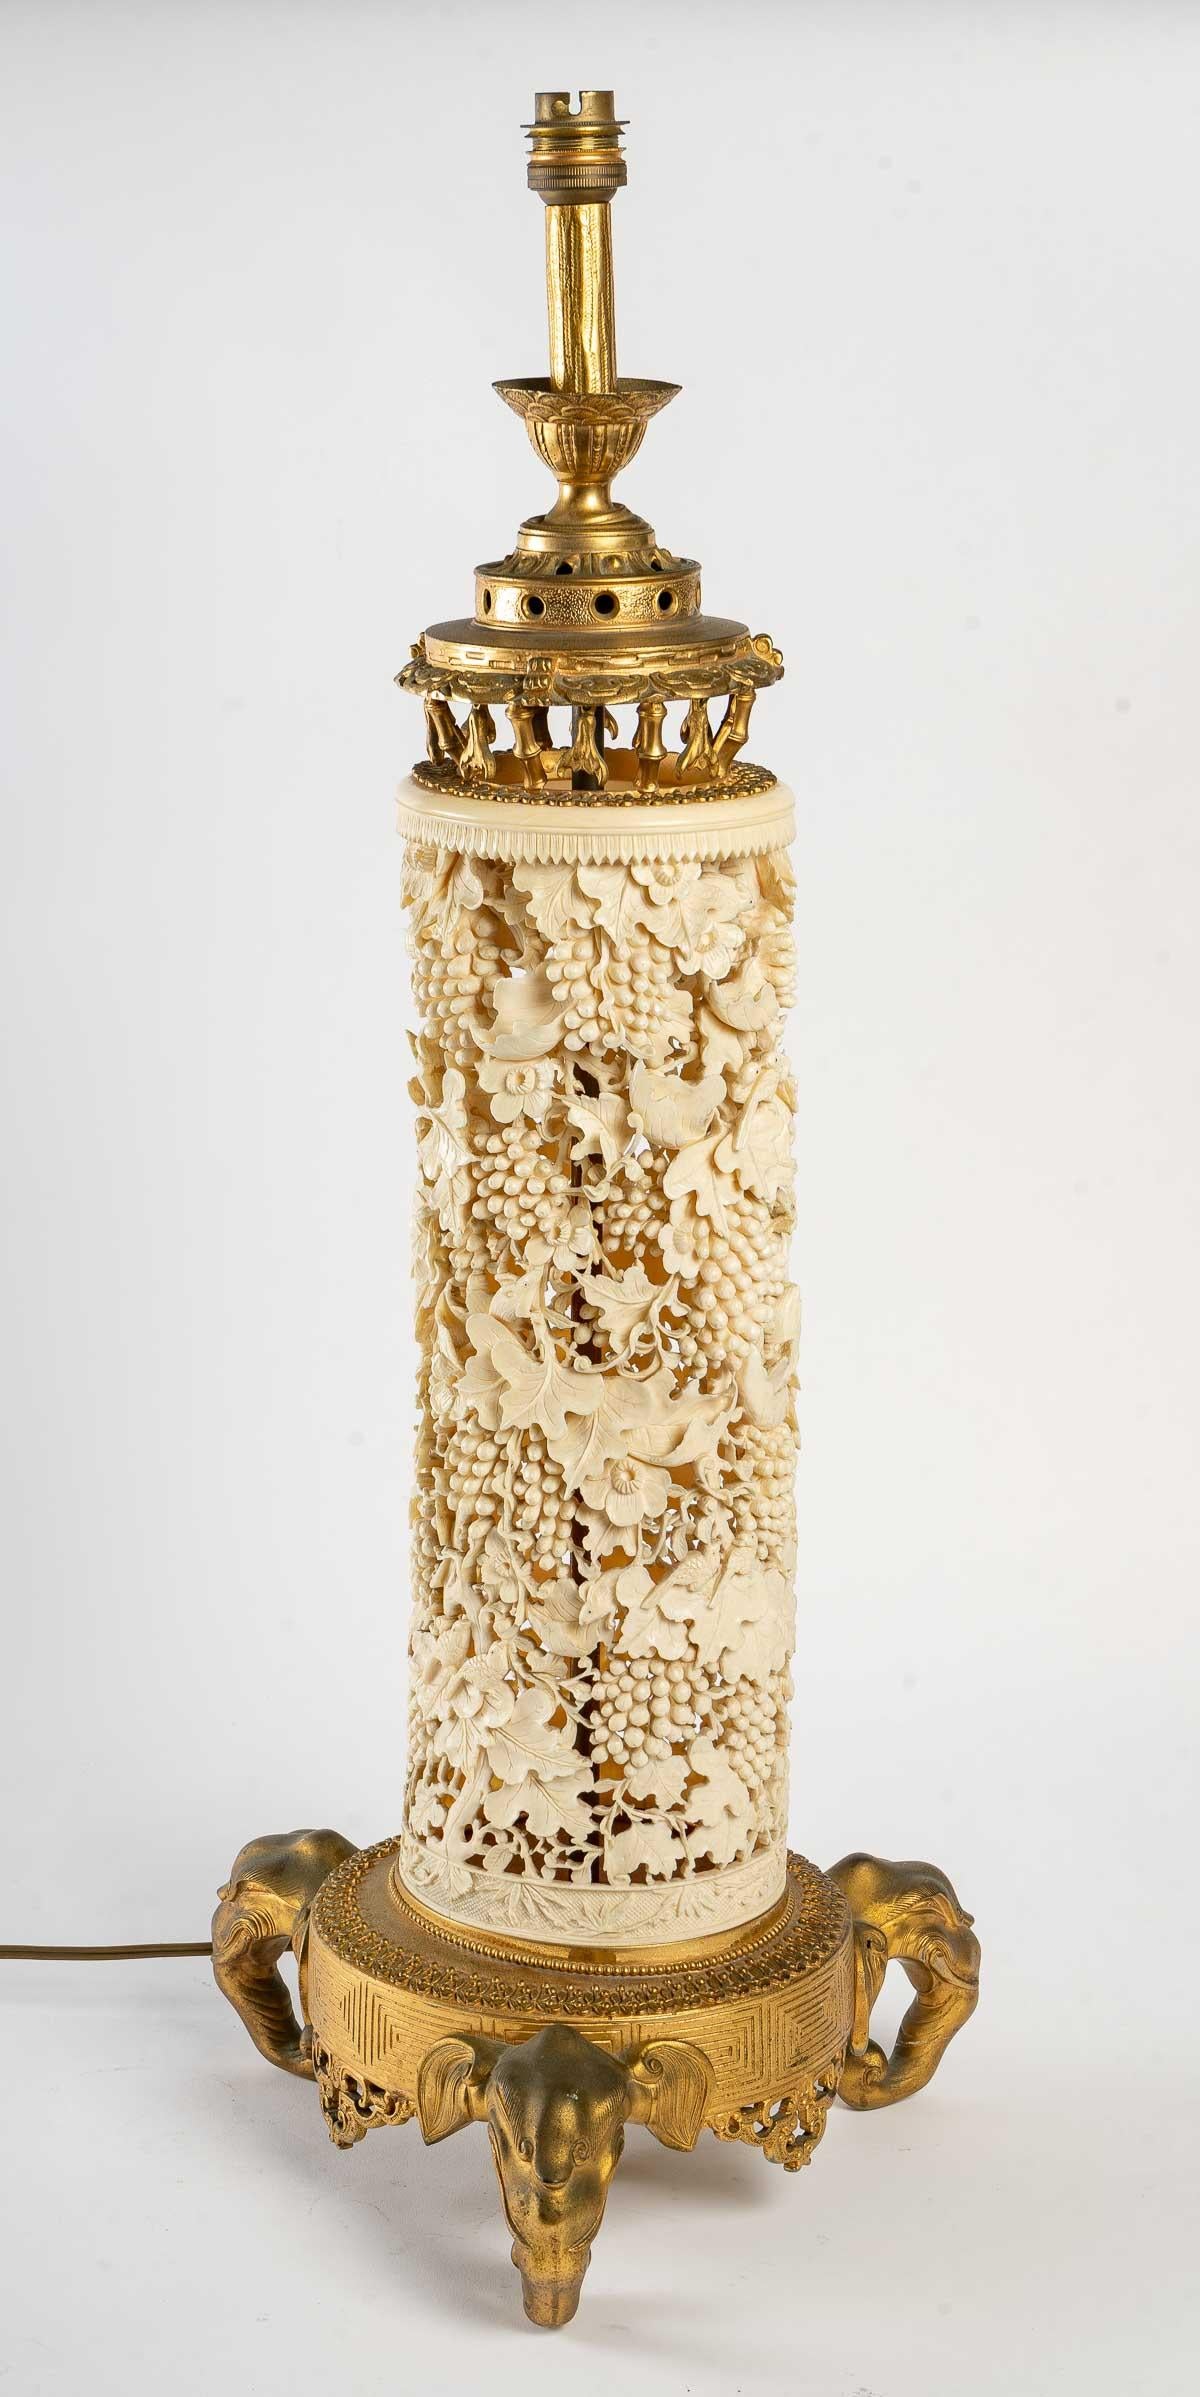 An important gilt bronze and carved ivory lamp, Chinese work of the 19th century, Napoleon III period.

Measures: H: 69 cm, D: 30 cm.